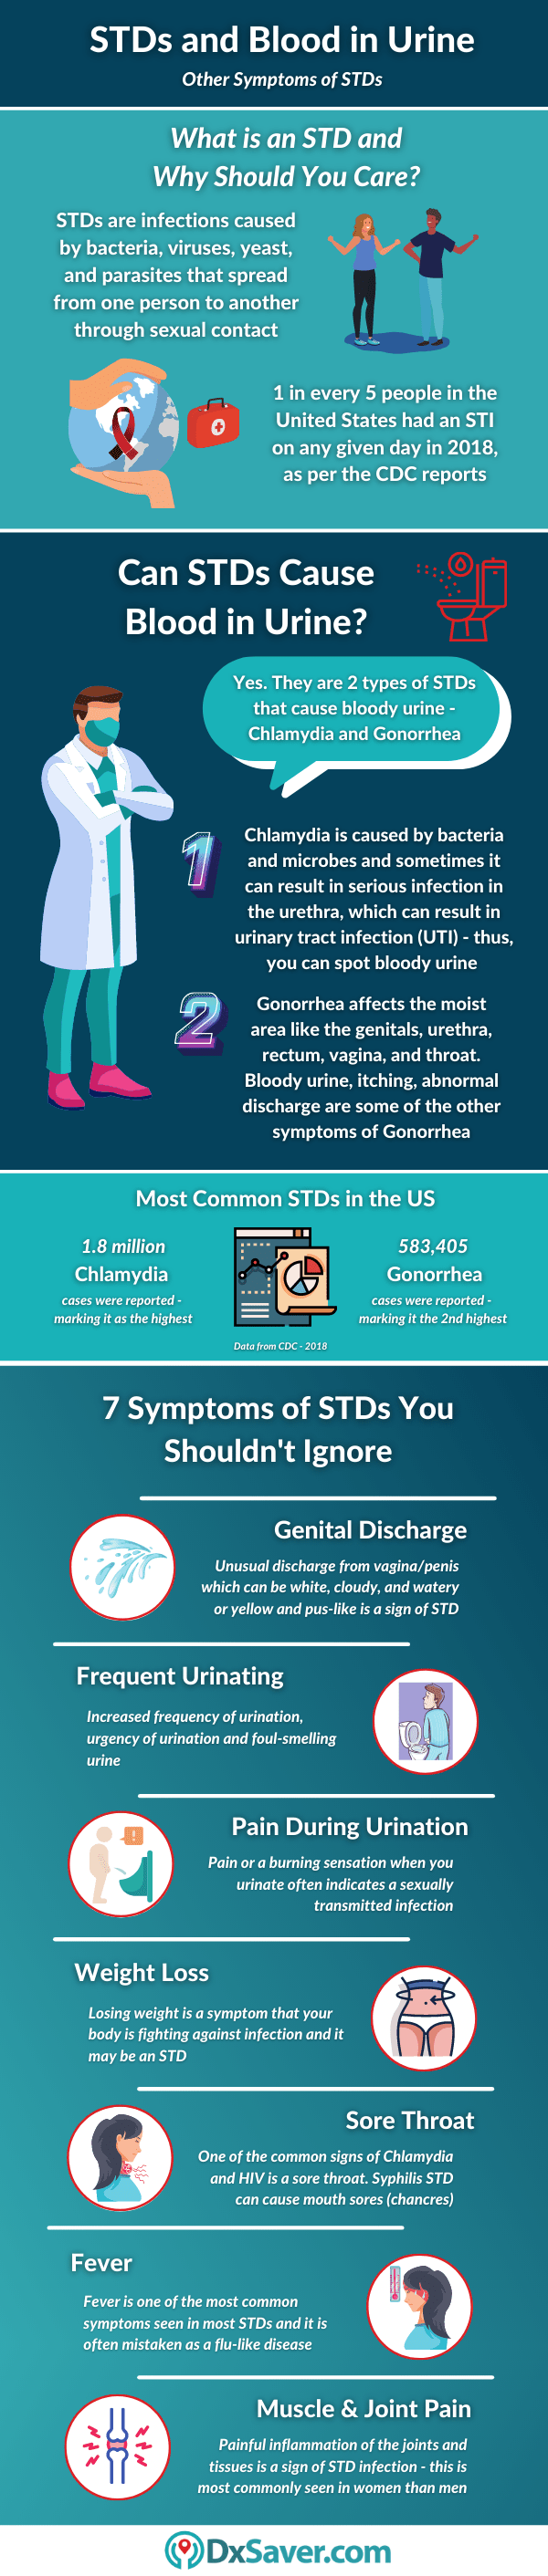 STDs Blood in Urine and Penis/Vaginal Discharge